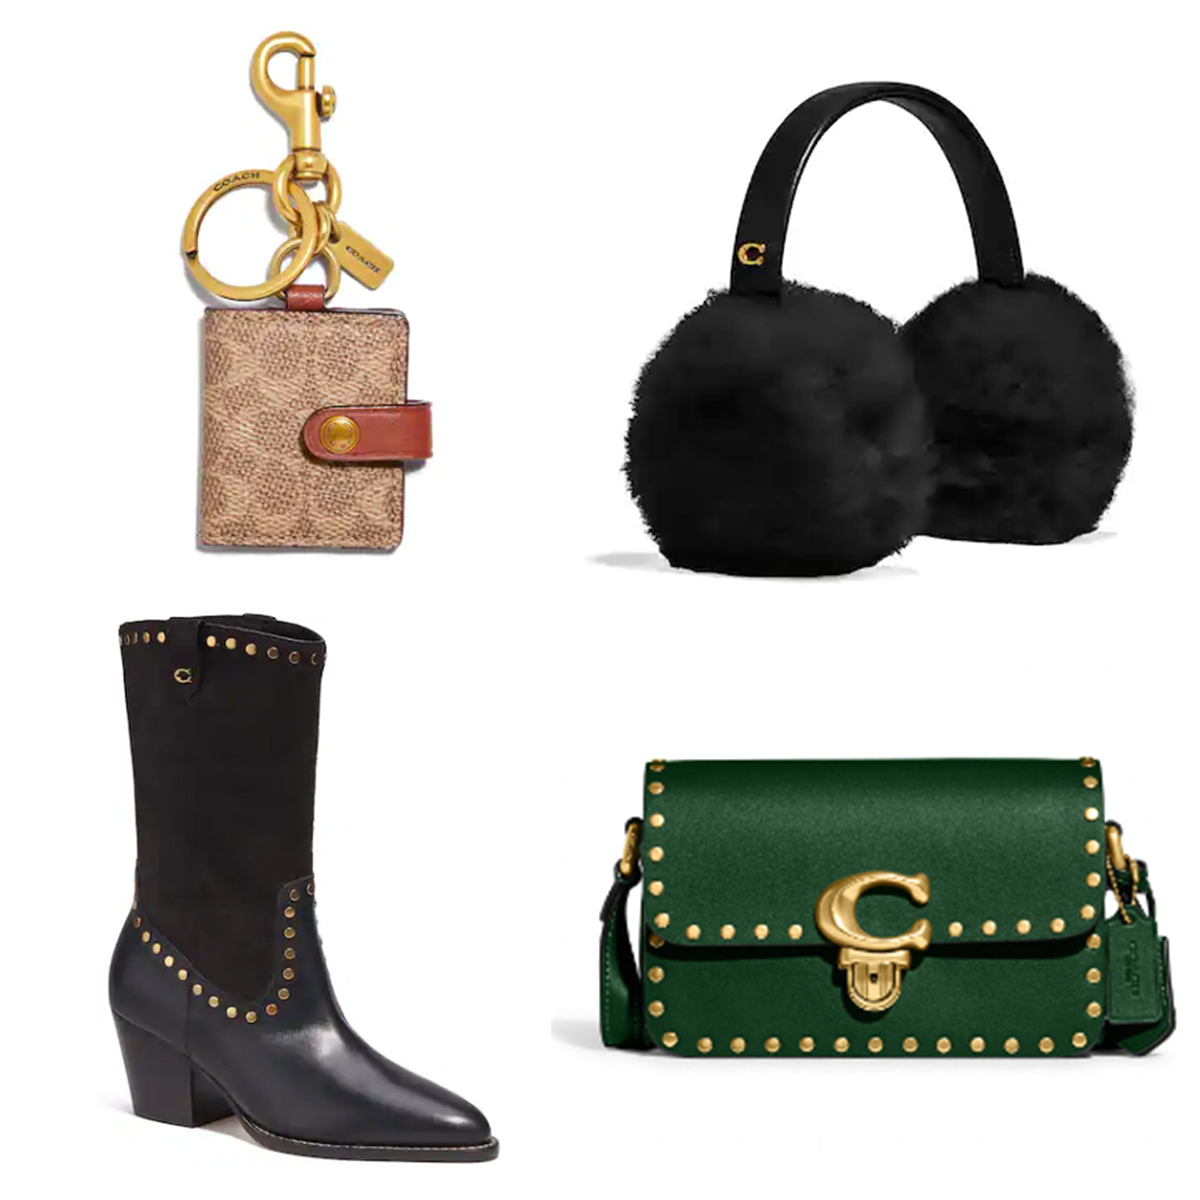 All The Handbags You'll Be “Adding To Cart” This Black Friday